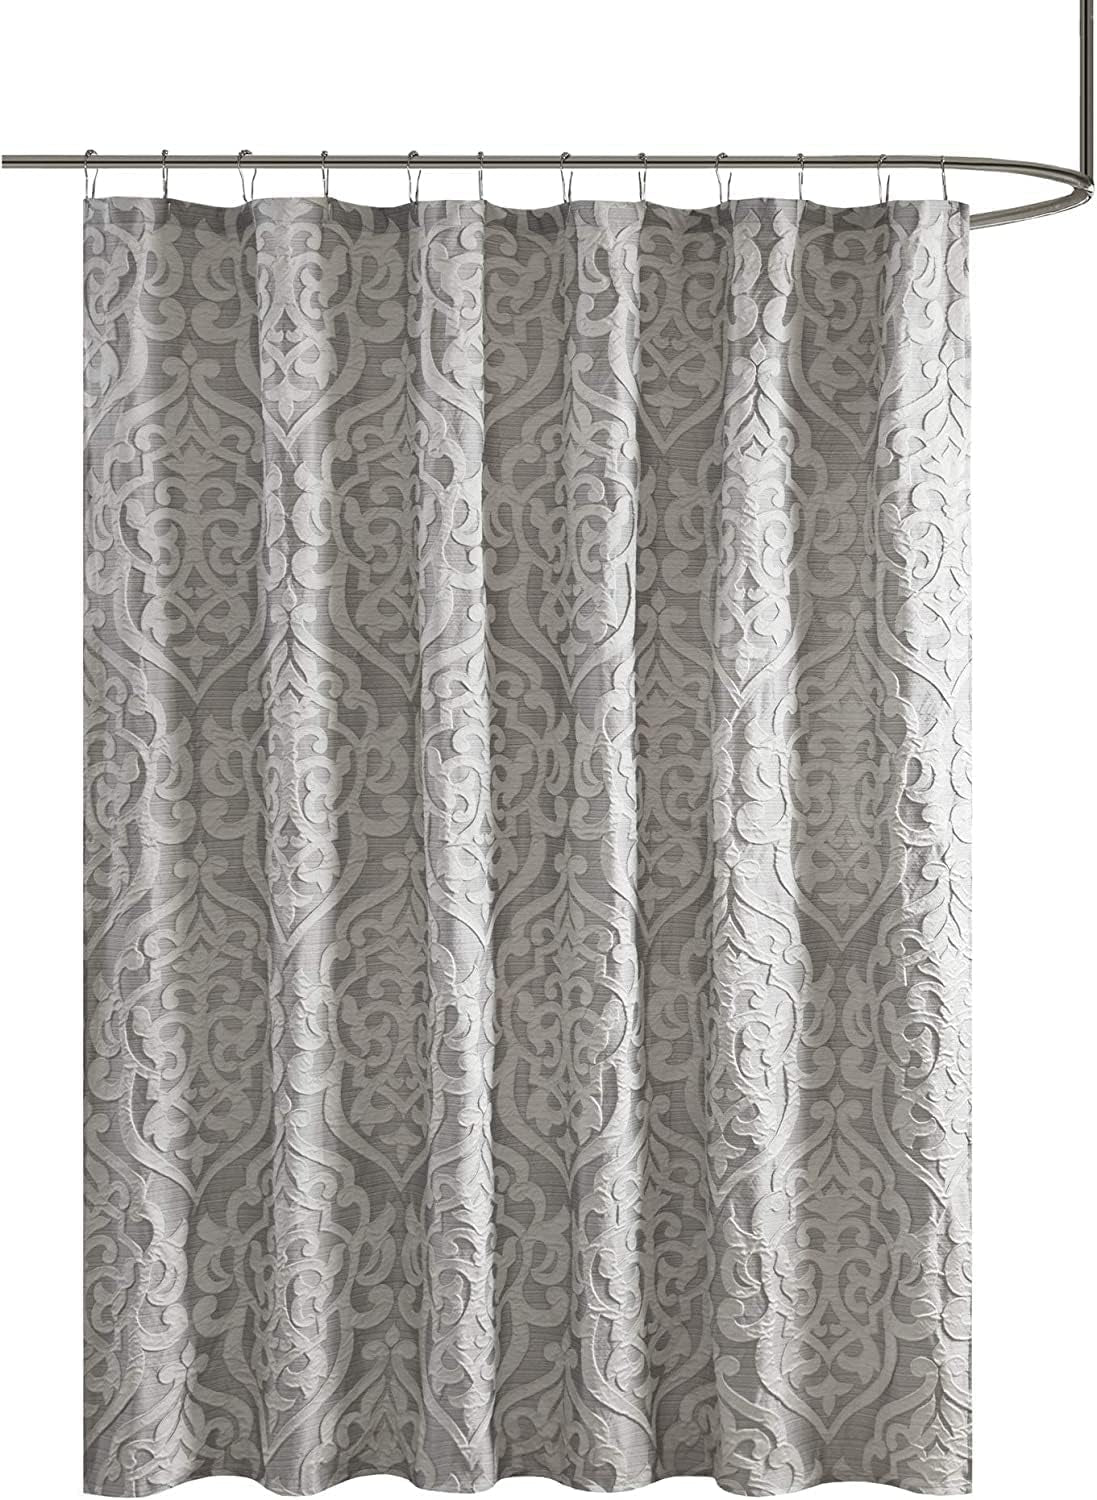 Madison Park Odette Fabric Shower Curtain Luxe Textured Jacquard, Damask Medallion Machine Washable Modern Home Bathroom Decor, Bathtub Privacy Screen, 72" X 72", Silver